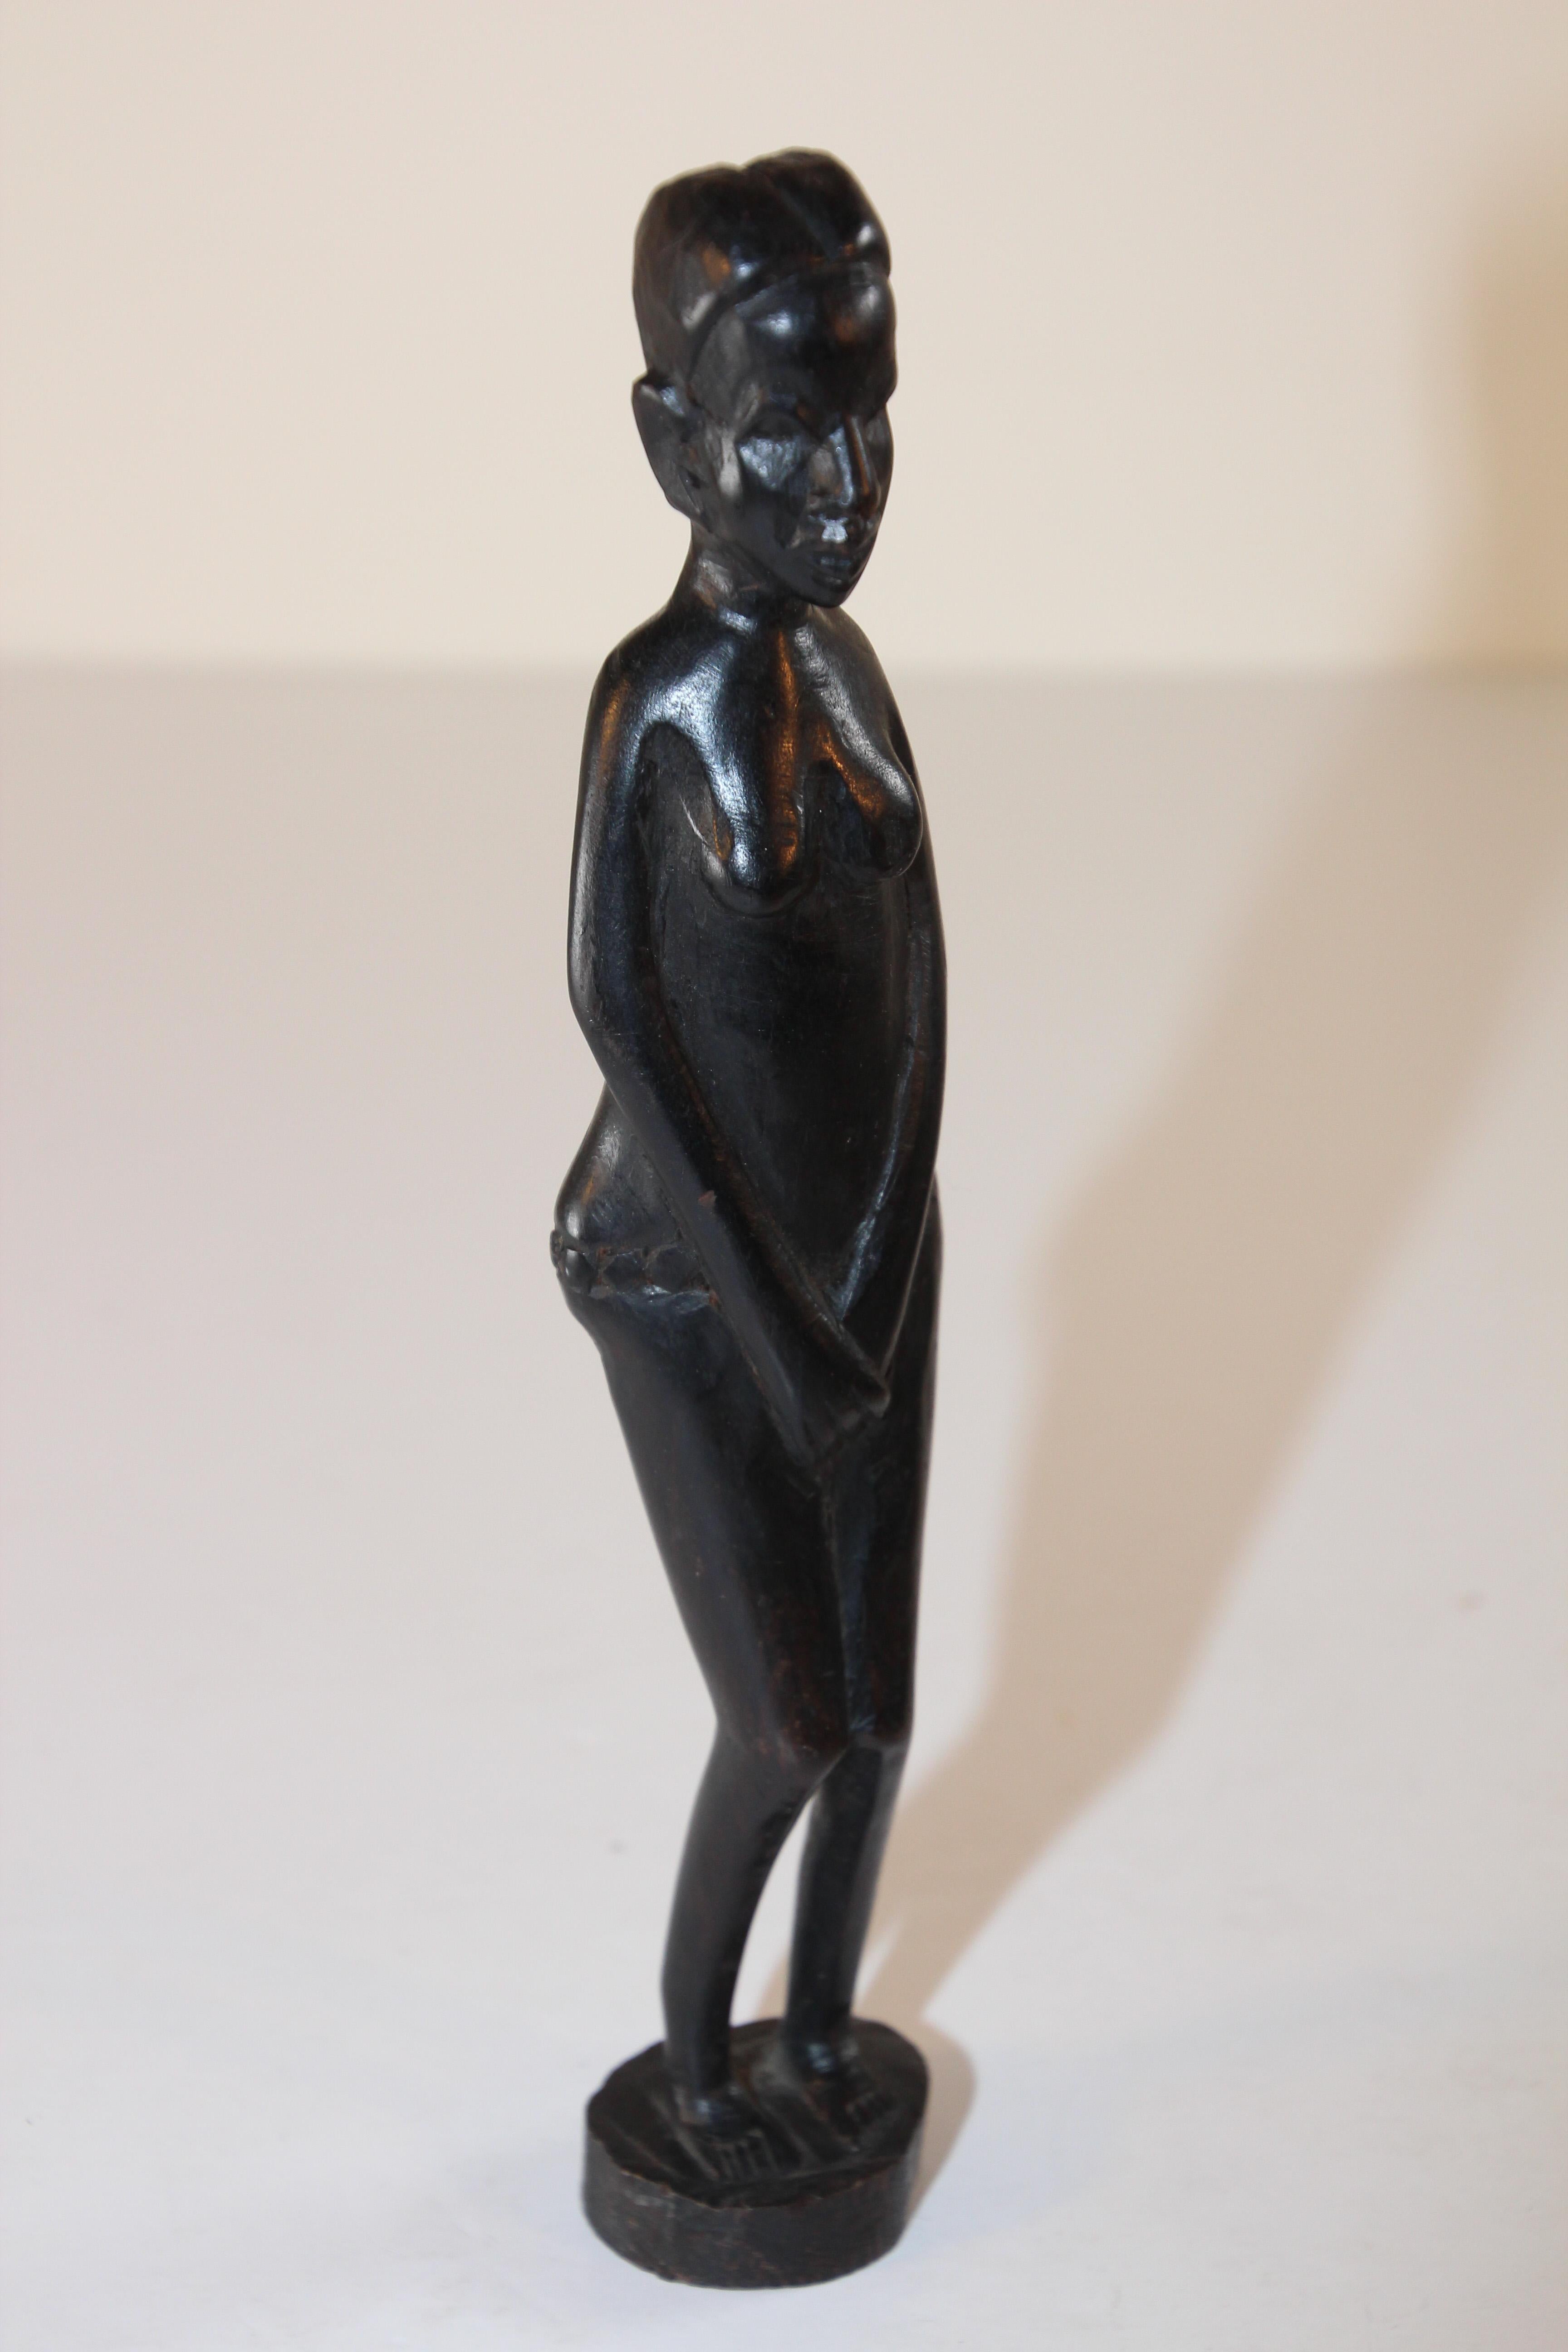 Ebony Decorative Hand-Carved African Set of Wood Statues from Kenya